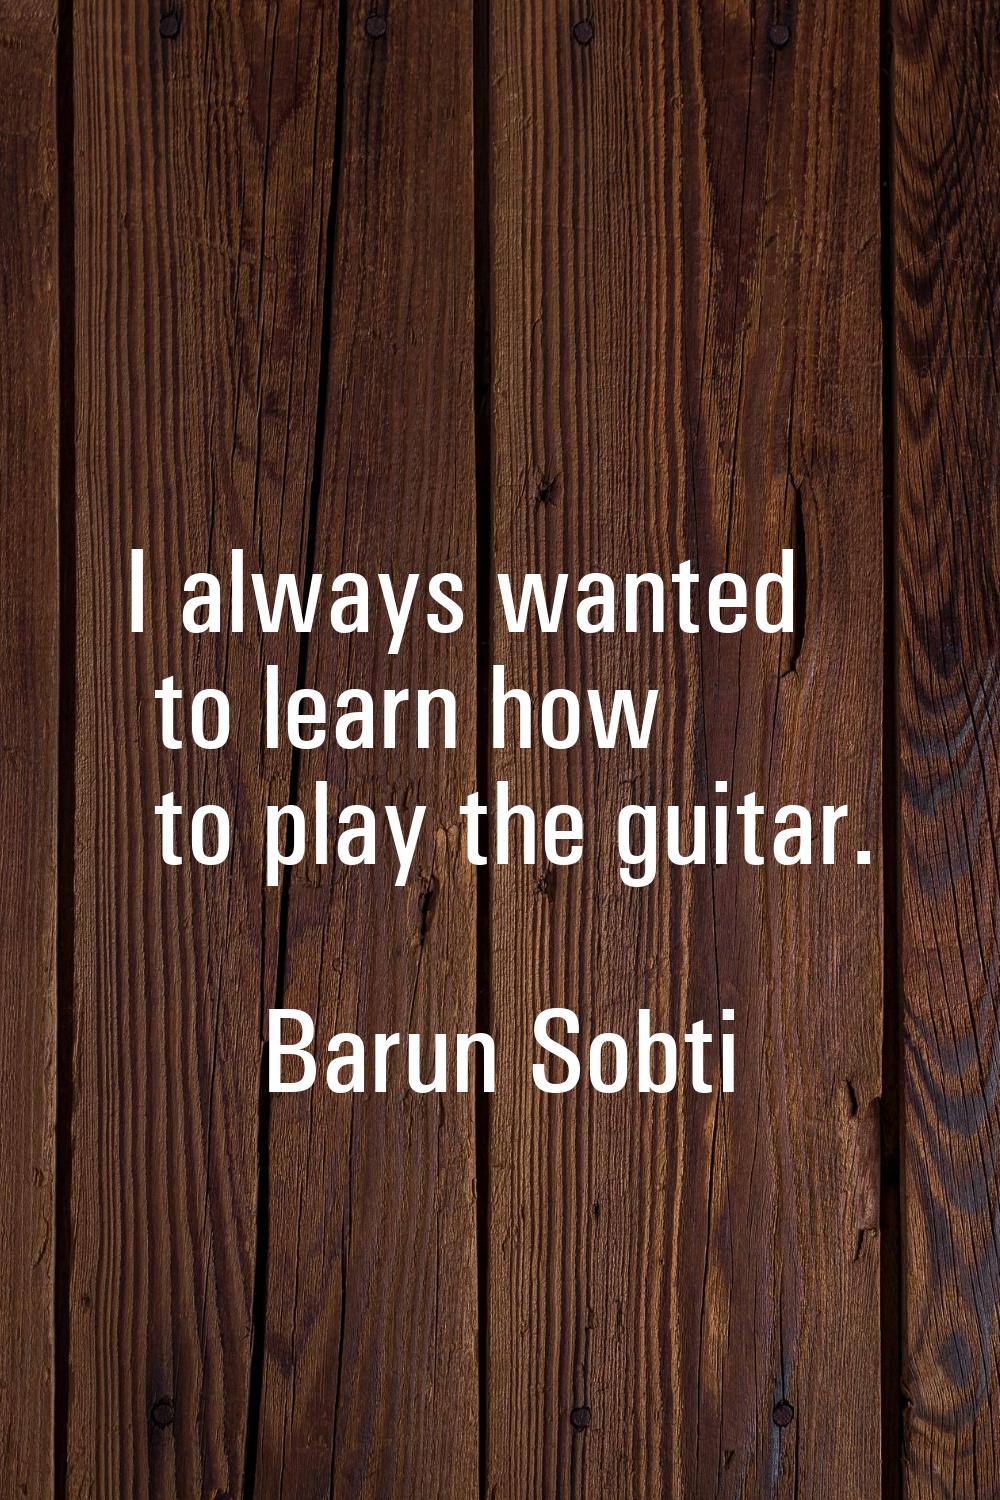 I always wanted to learn how to play the guitar.